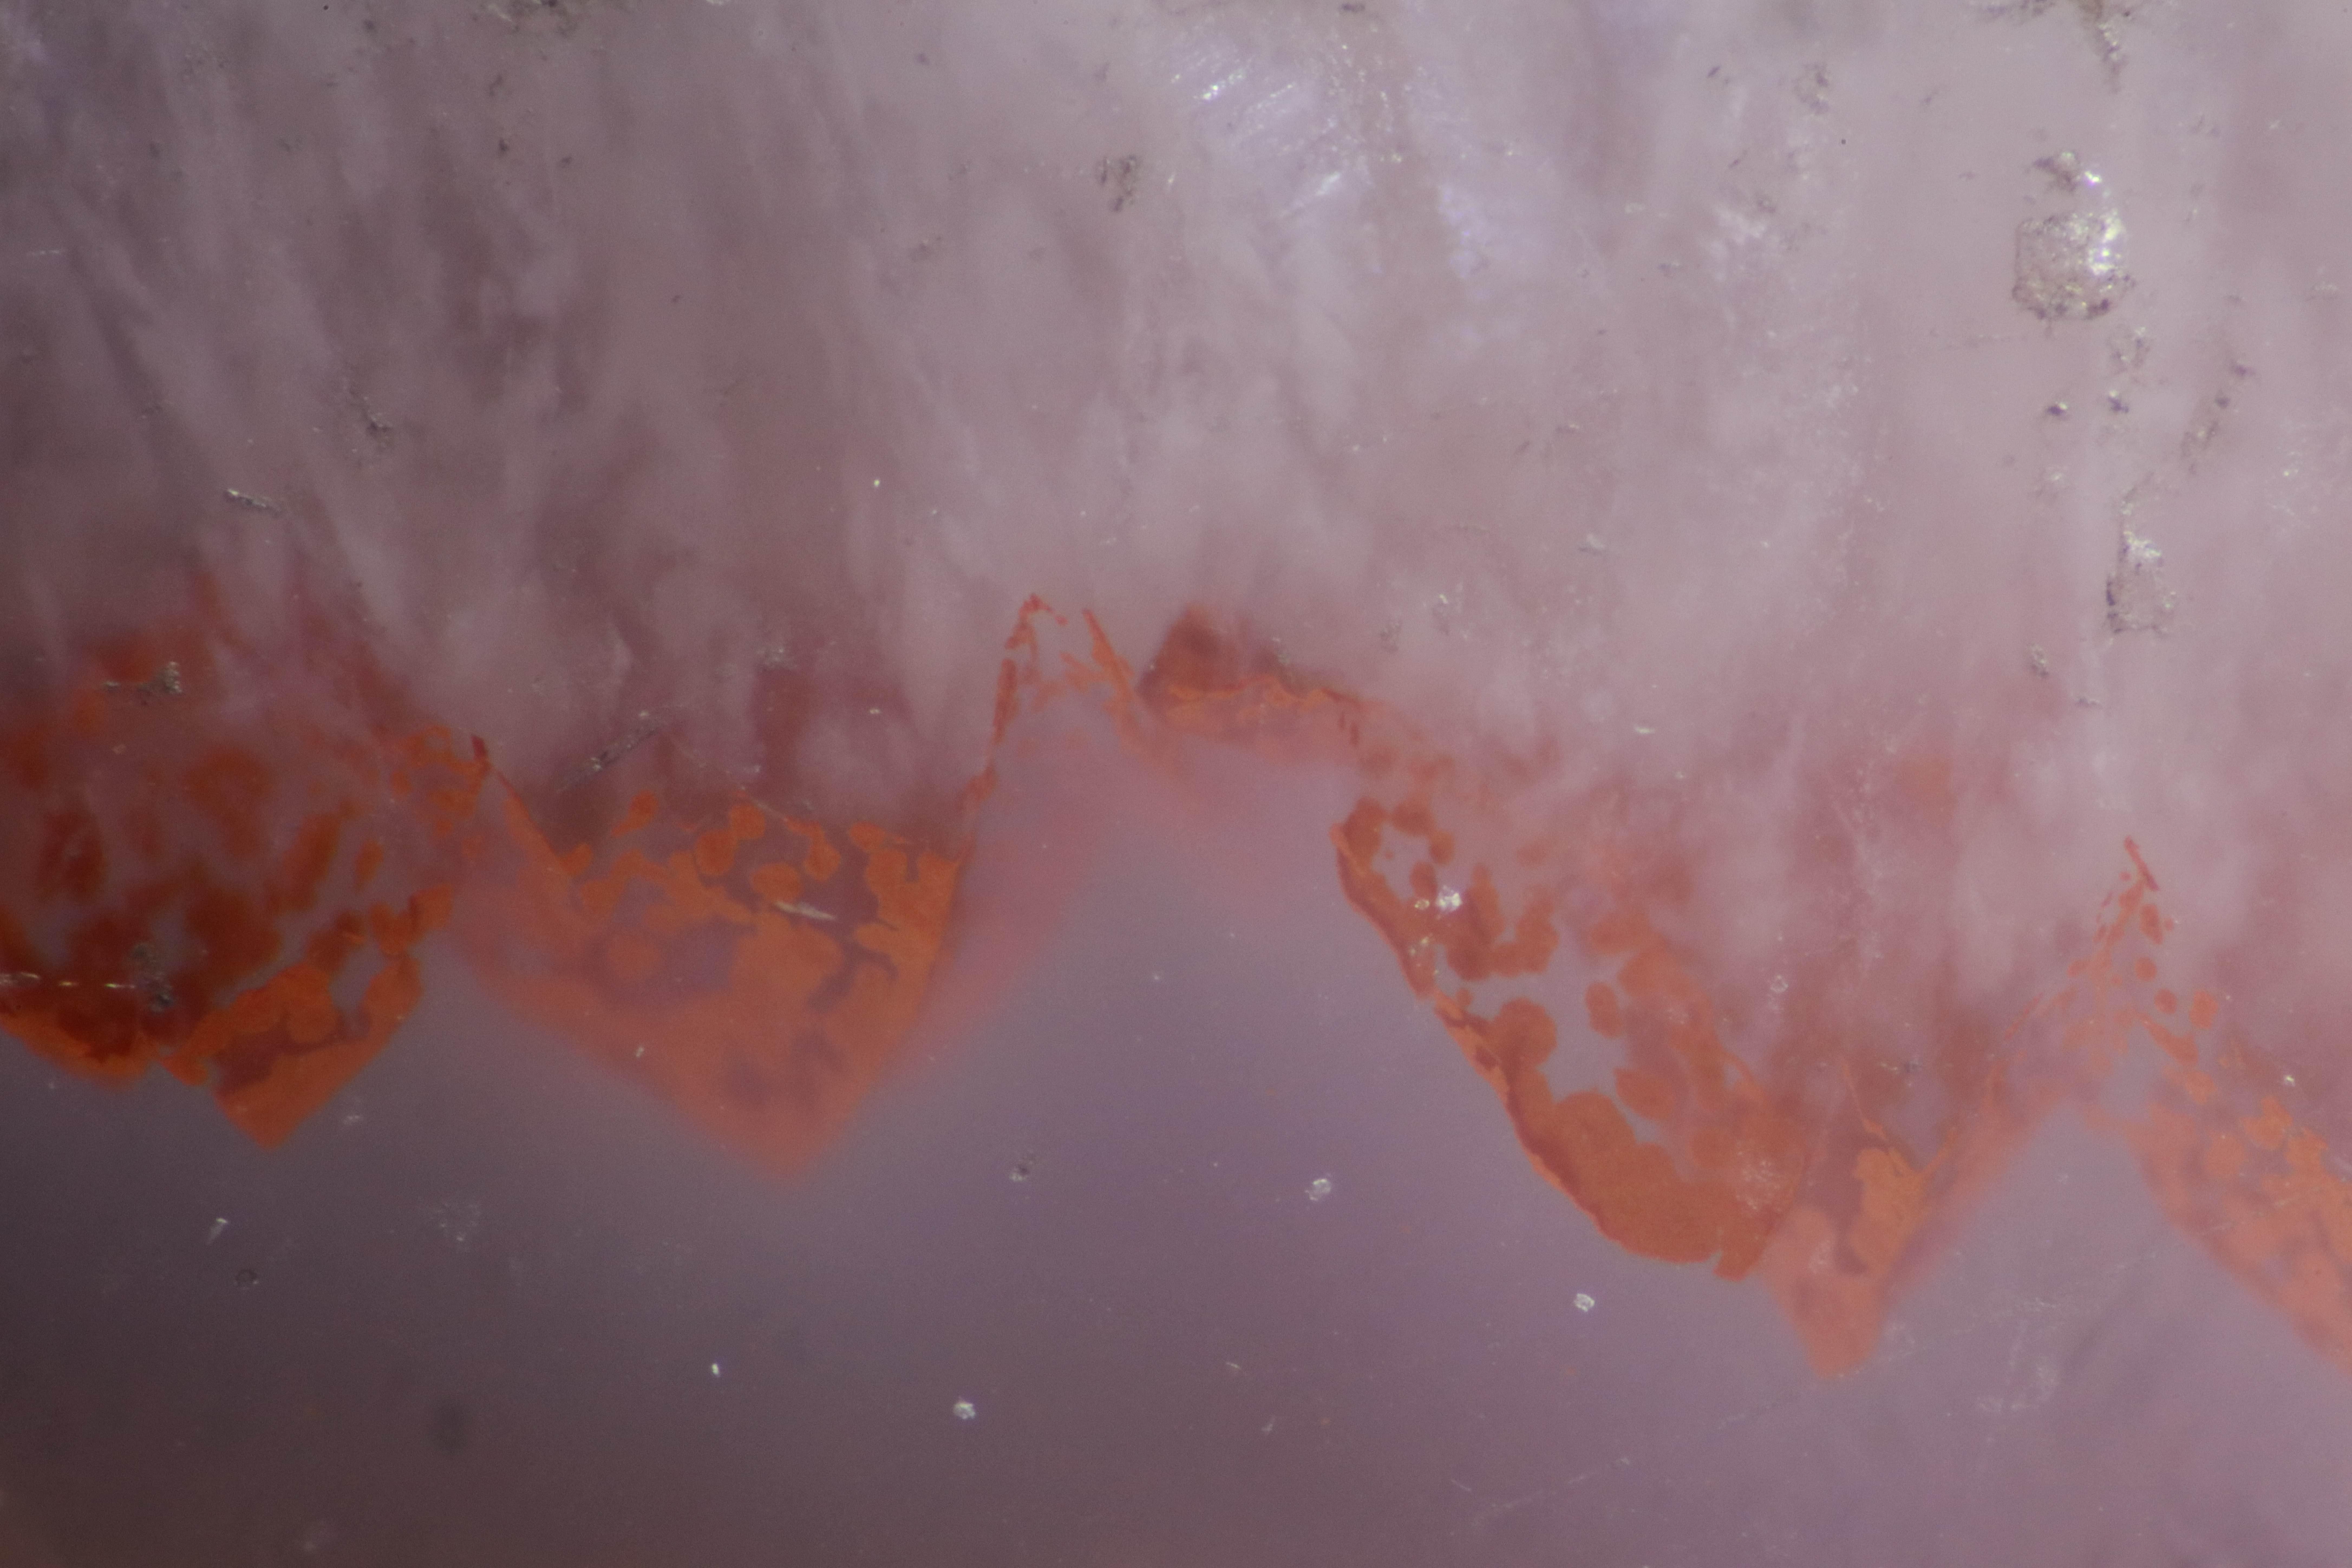 Micro-cosmic is a photographic and video exploration of crystals and minerals under a microscope.
In a scale not visible to the human eye these images could be interpreted as cosmic Formations, topographic landscapes, cells or living organisms. All